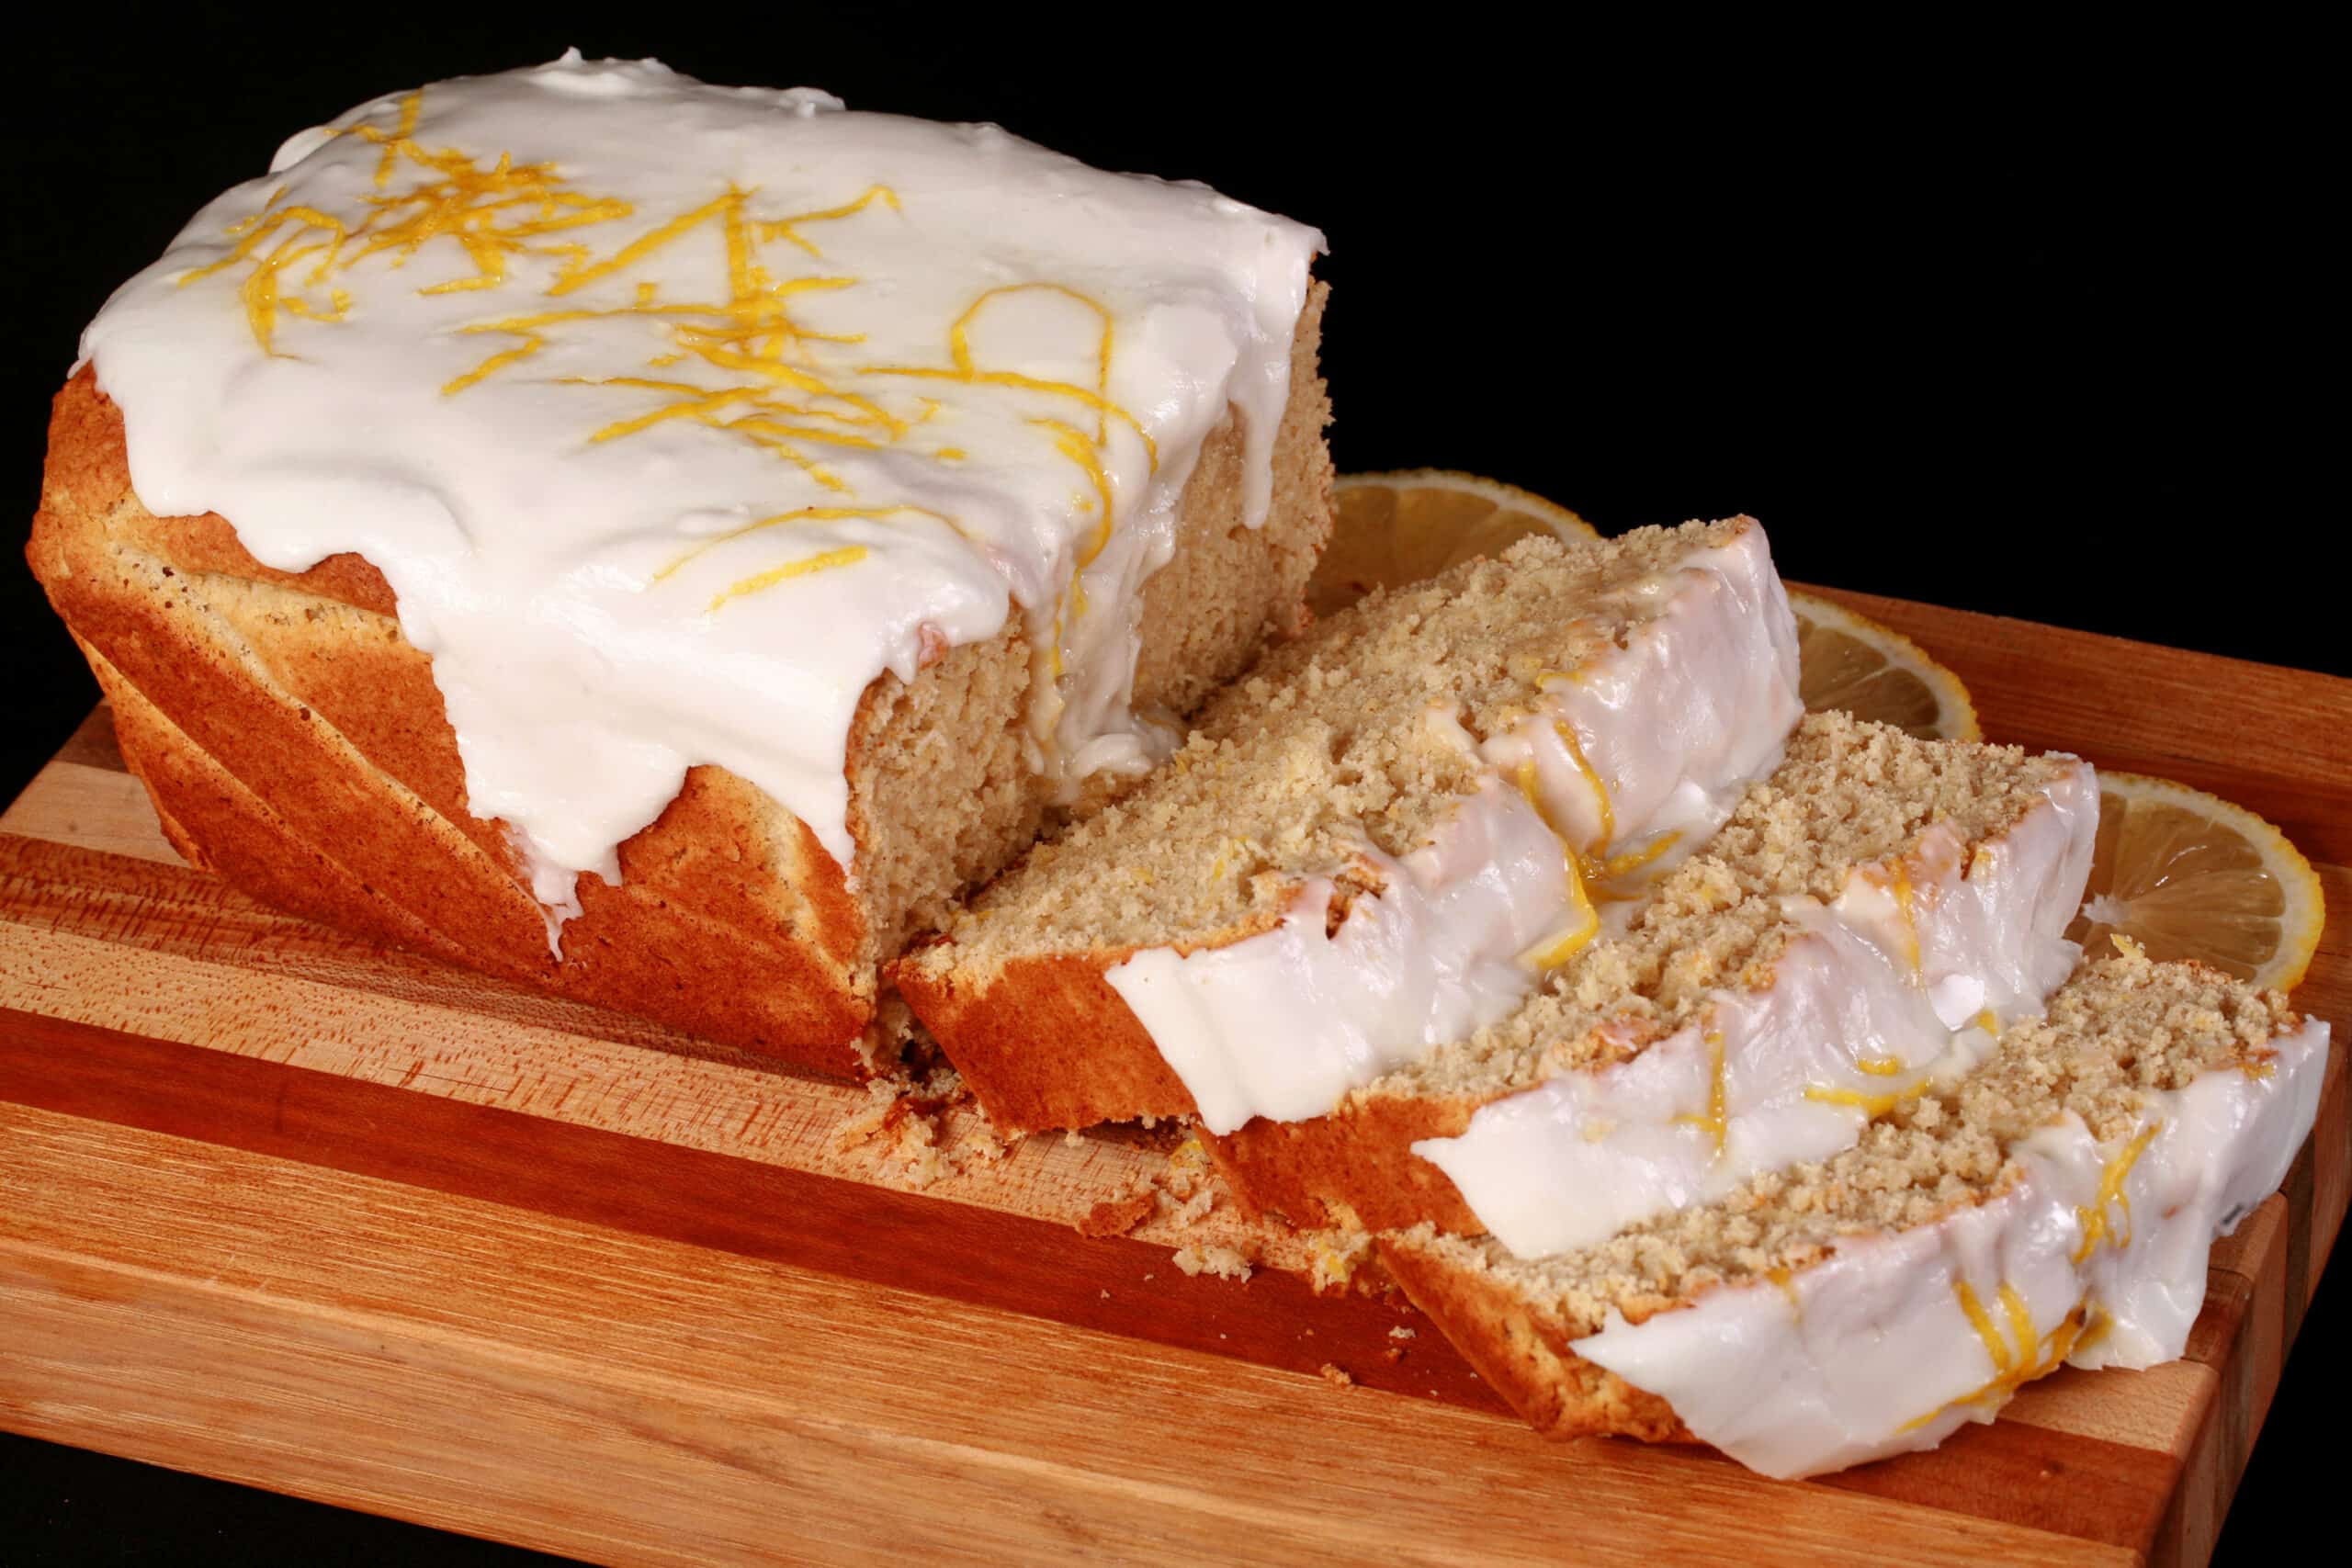 A sliced loaf of gluten free lemon drizzle cake, with white glaze and lemon zest on top.